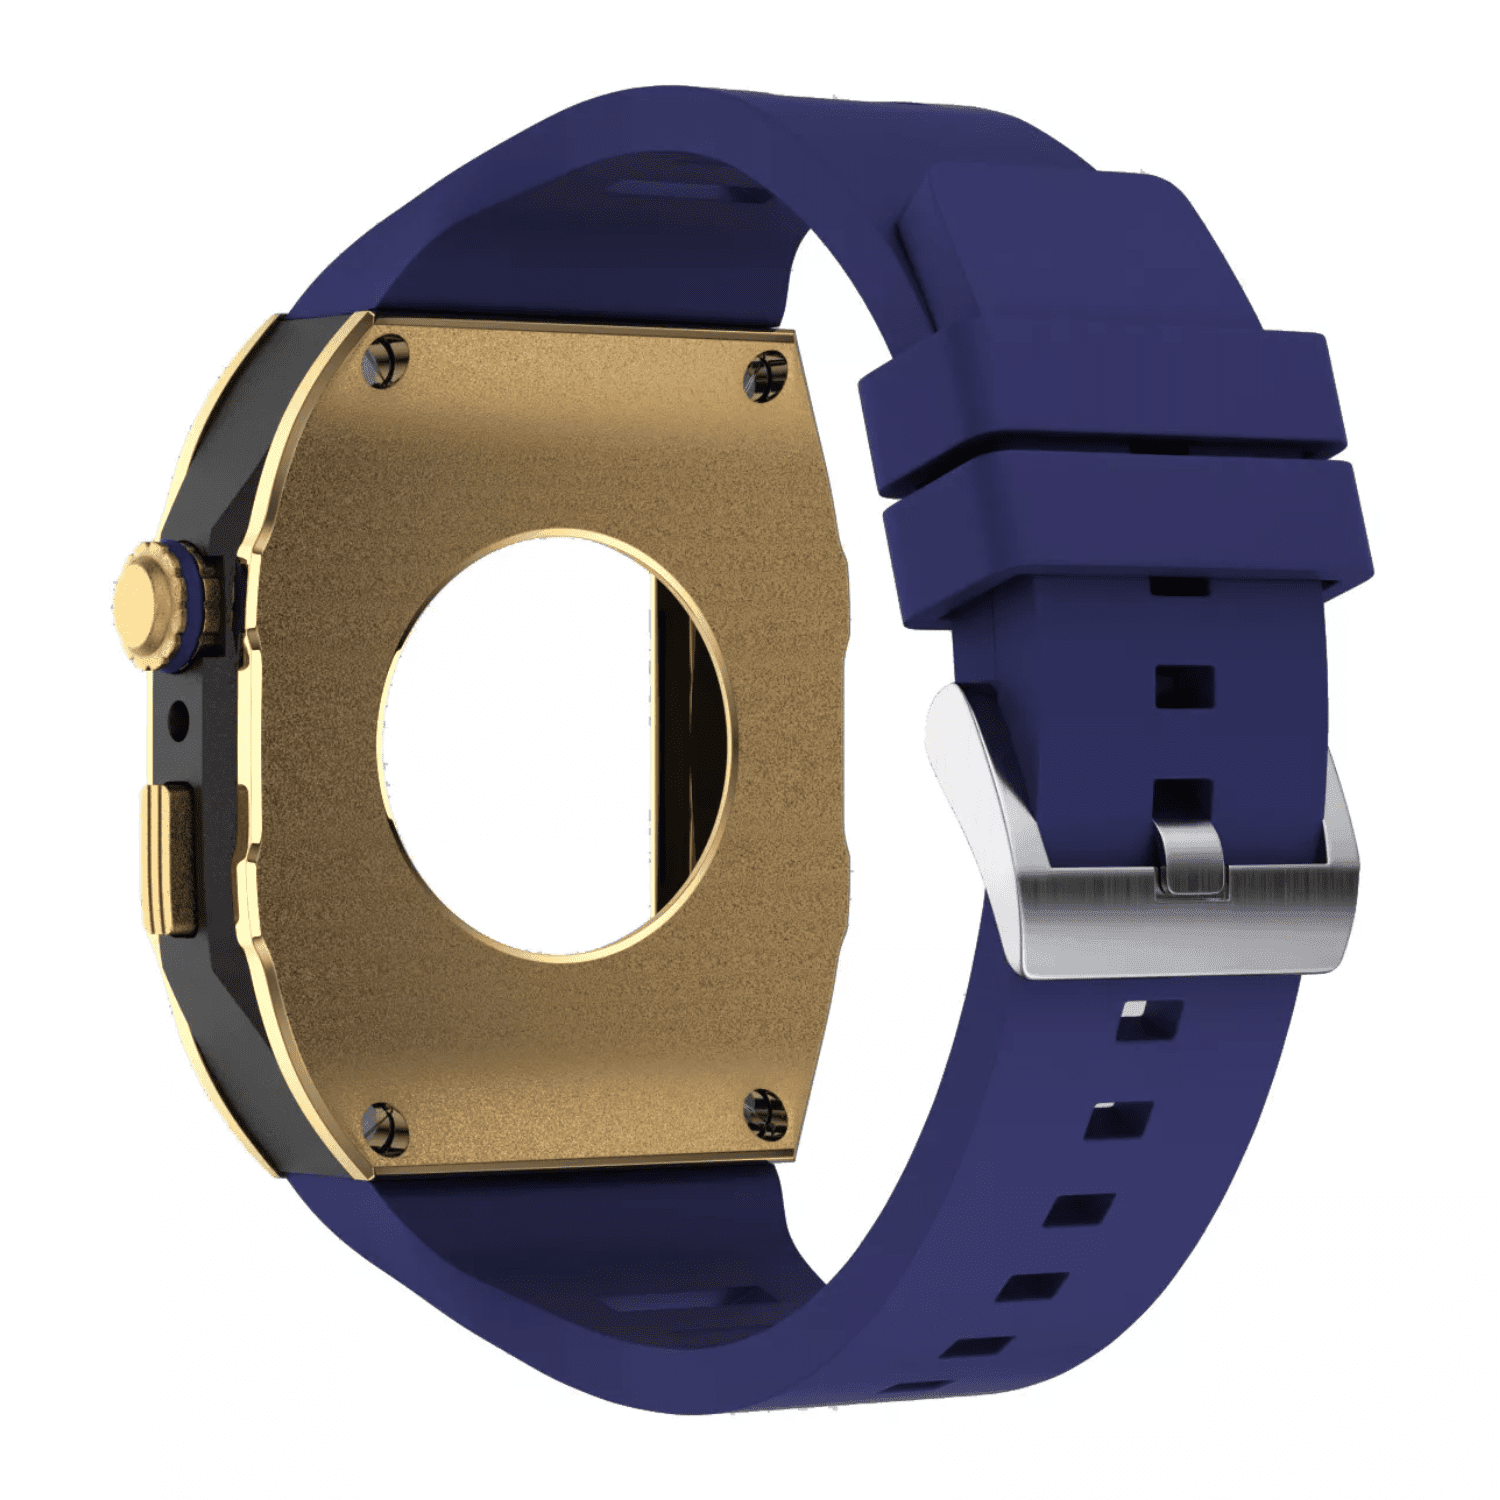 Golden Concept Style Case and Strap for Apple Watch | Luxury & Sporty Apple Watch Case & Fashion Accessory | Mod Kit Replacement for Apple Watch Series SE/3/4/5/67/8 45 mm| Golden Case - Blue Band mod kits india dream watches apple watch